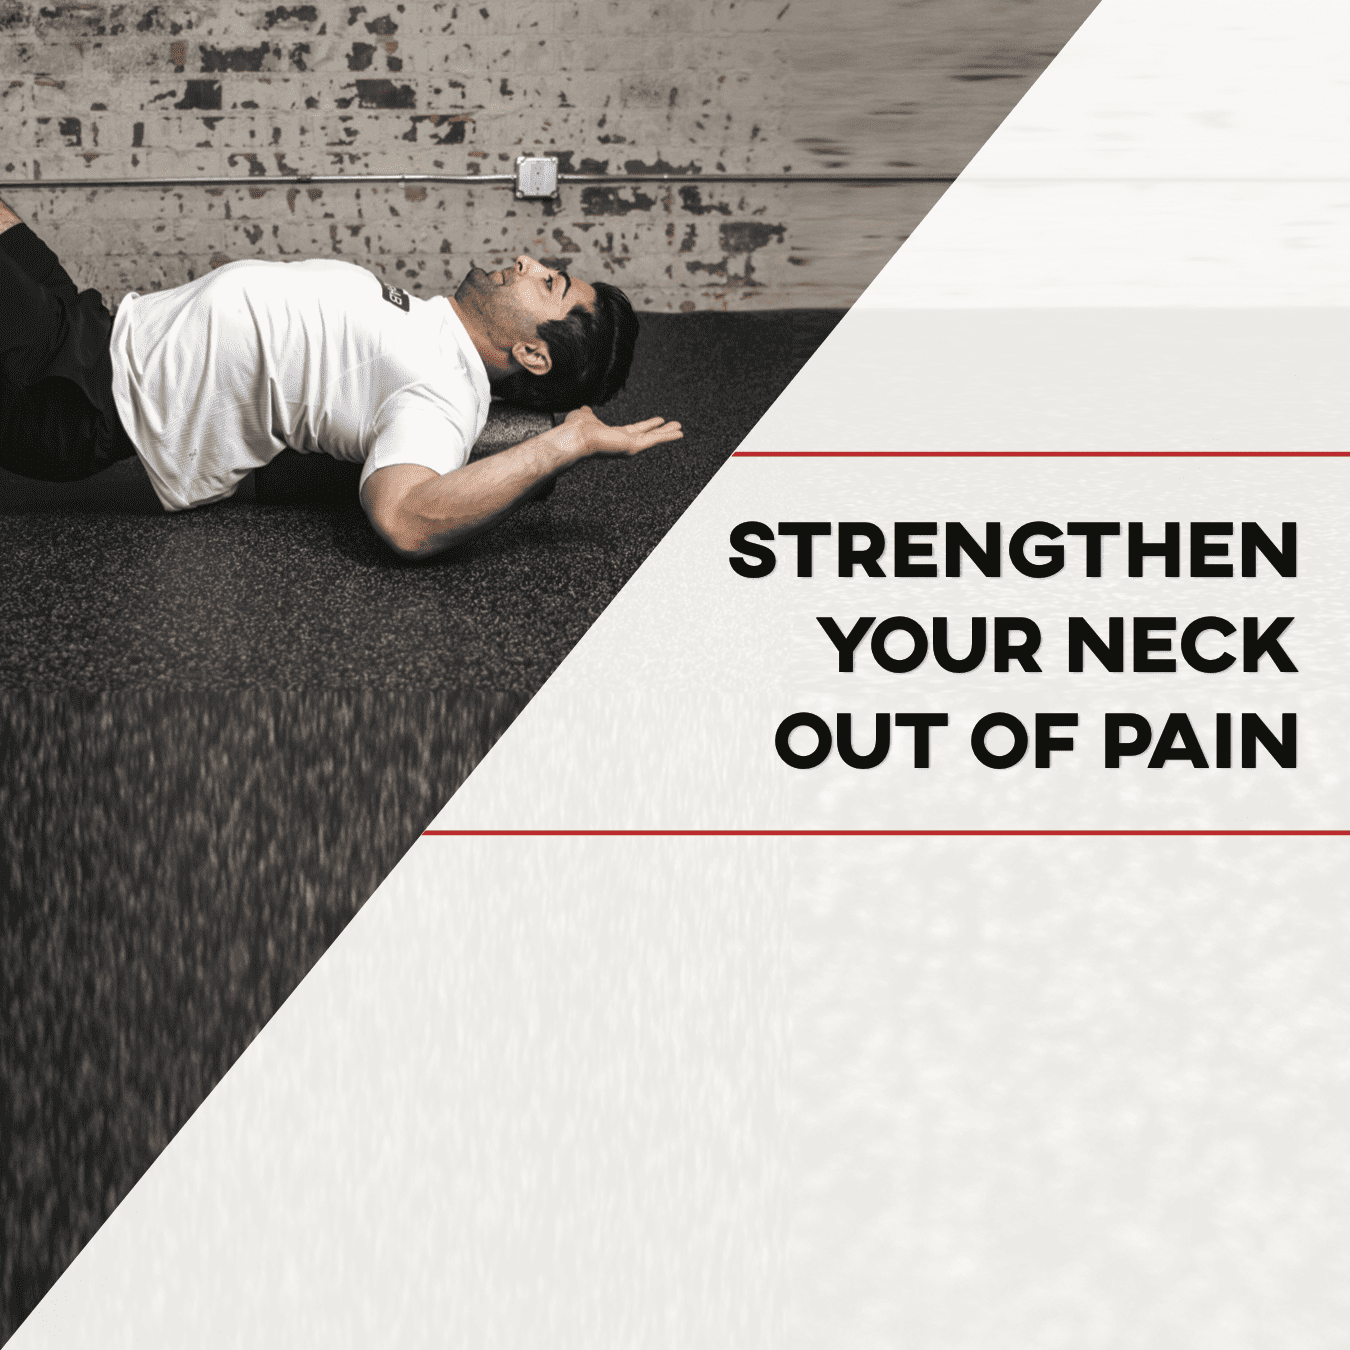 https://theprehabguys.com/wp-content/uploads/2022/09/Strengthen-your-neck-out-of-pain-INSTAGRAM.png